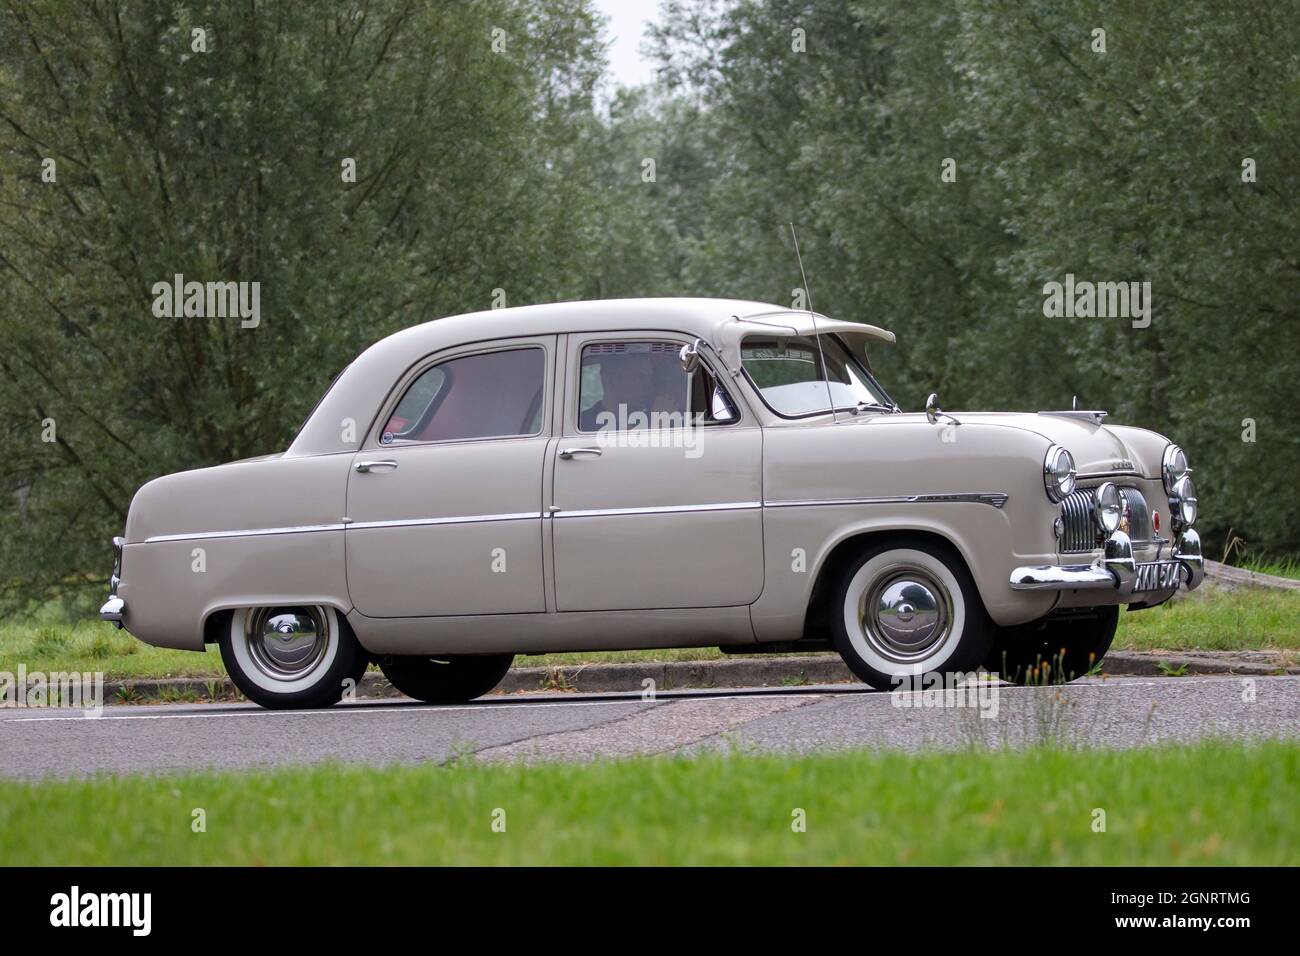 1956 Ford Consul vintage car Stock Photo